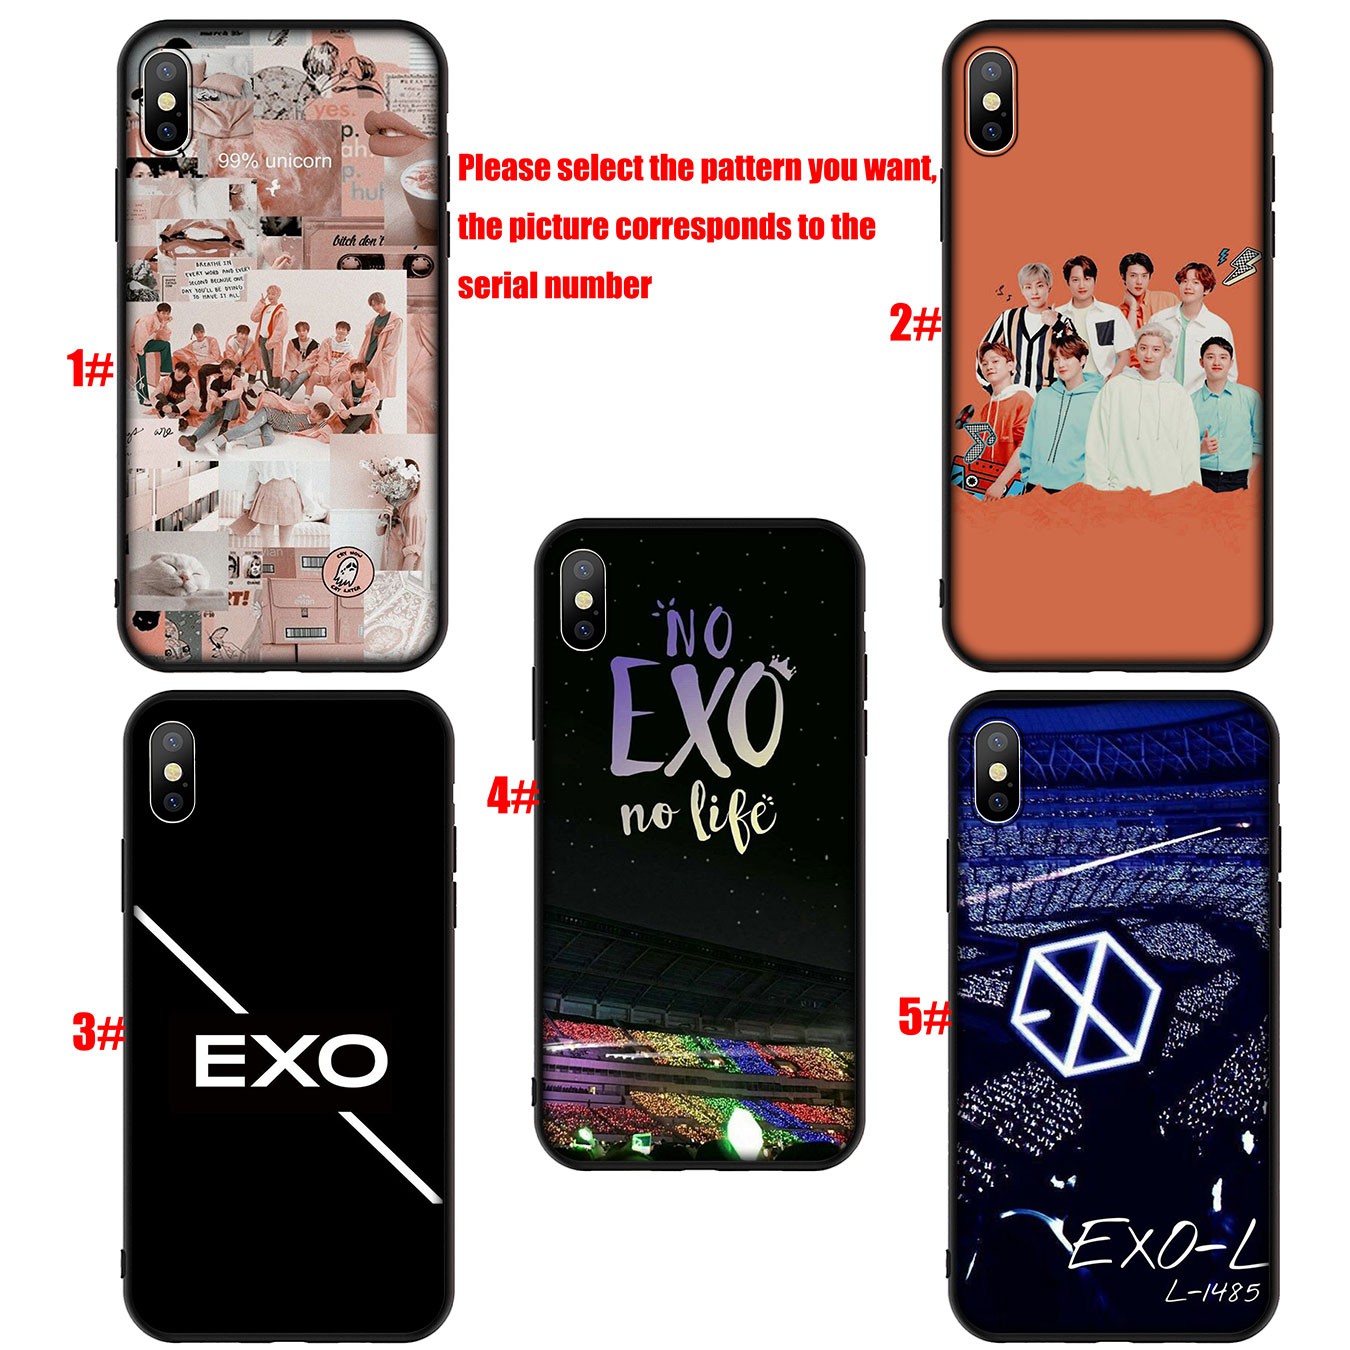 Samsung Galaxy S21 Ultra S8 Plus F62 M62 A2 A32 A52 A72 S21+ S8+ S21Plus Casing Soft Silicone Phone Case kpop exo Cover